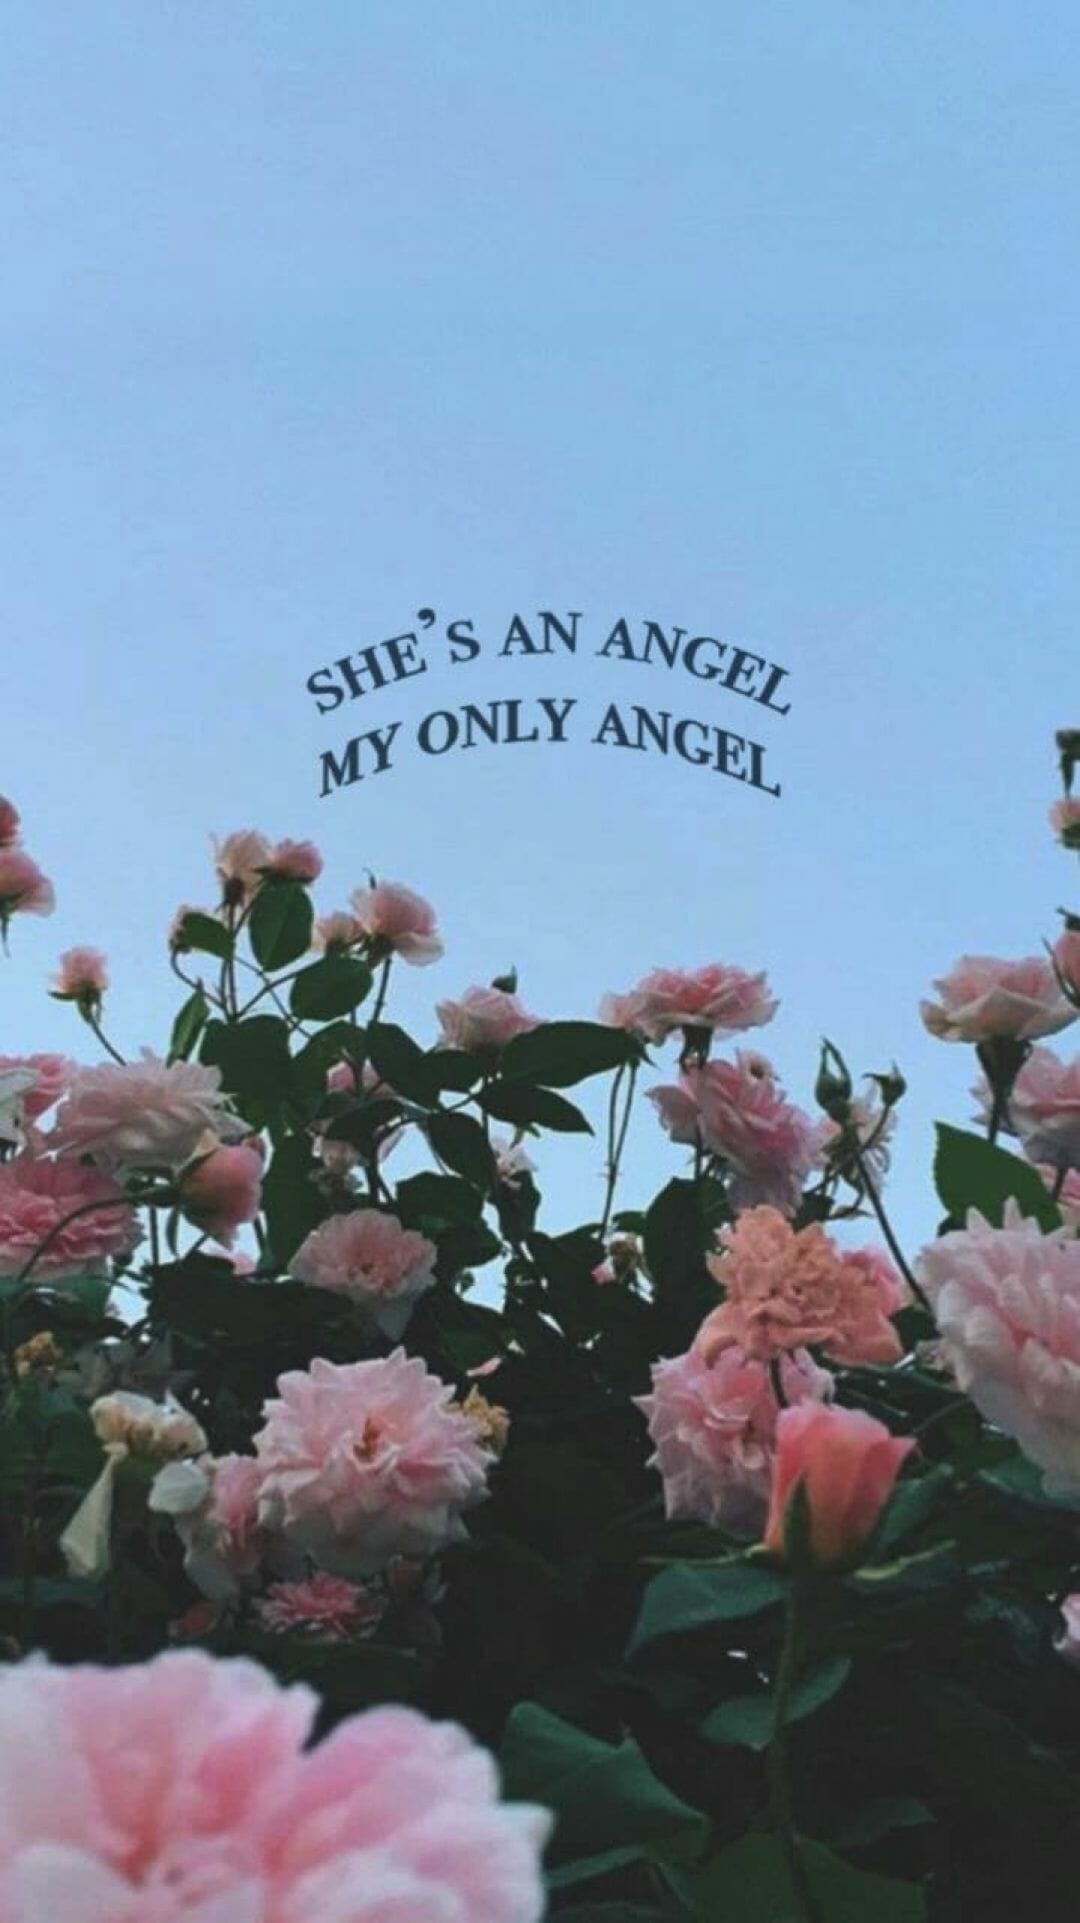 IPhone wallpaper with flowers and text that says 